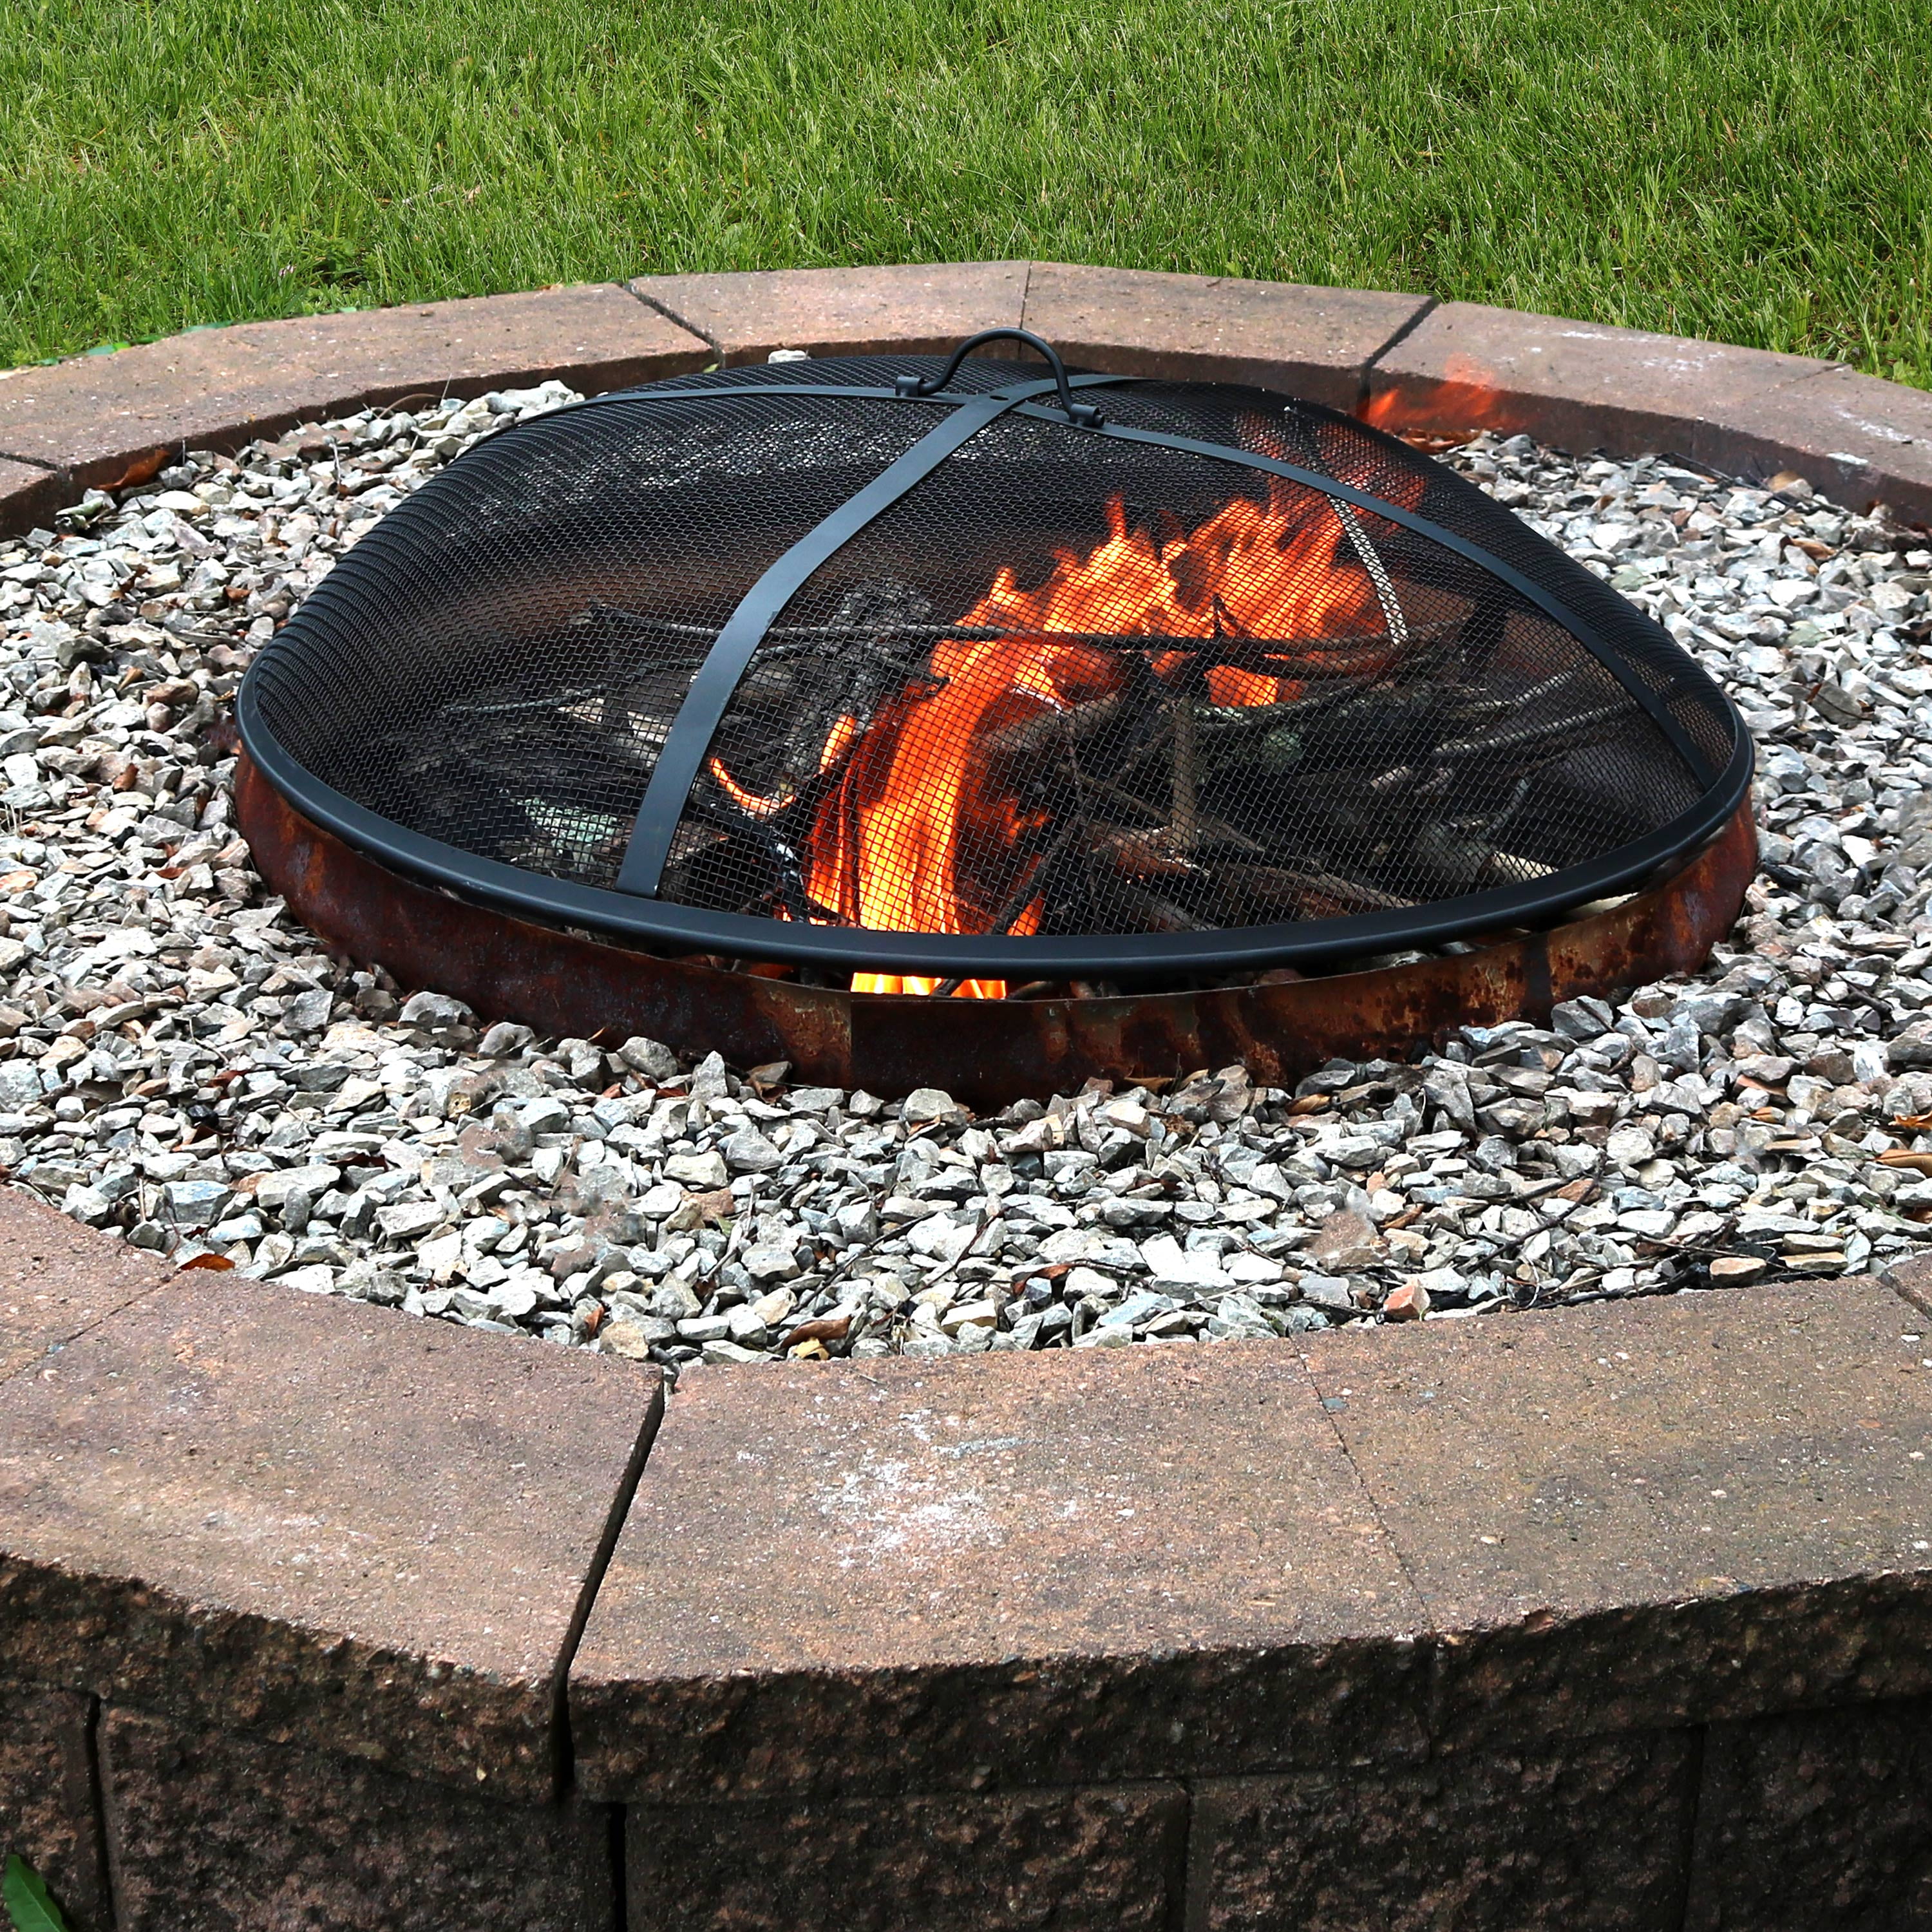 Sunnydaze Outdoor Fire Pit Spark Screen, Screened In Fire Pit